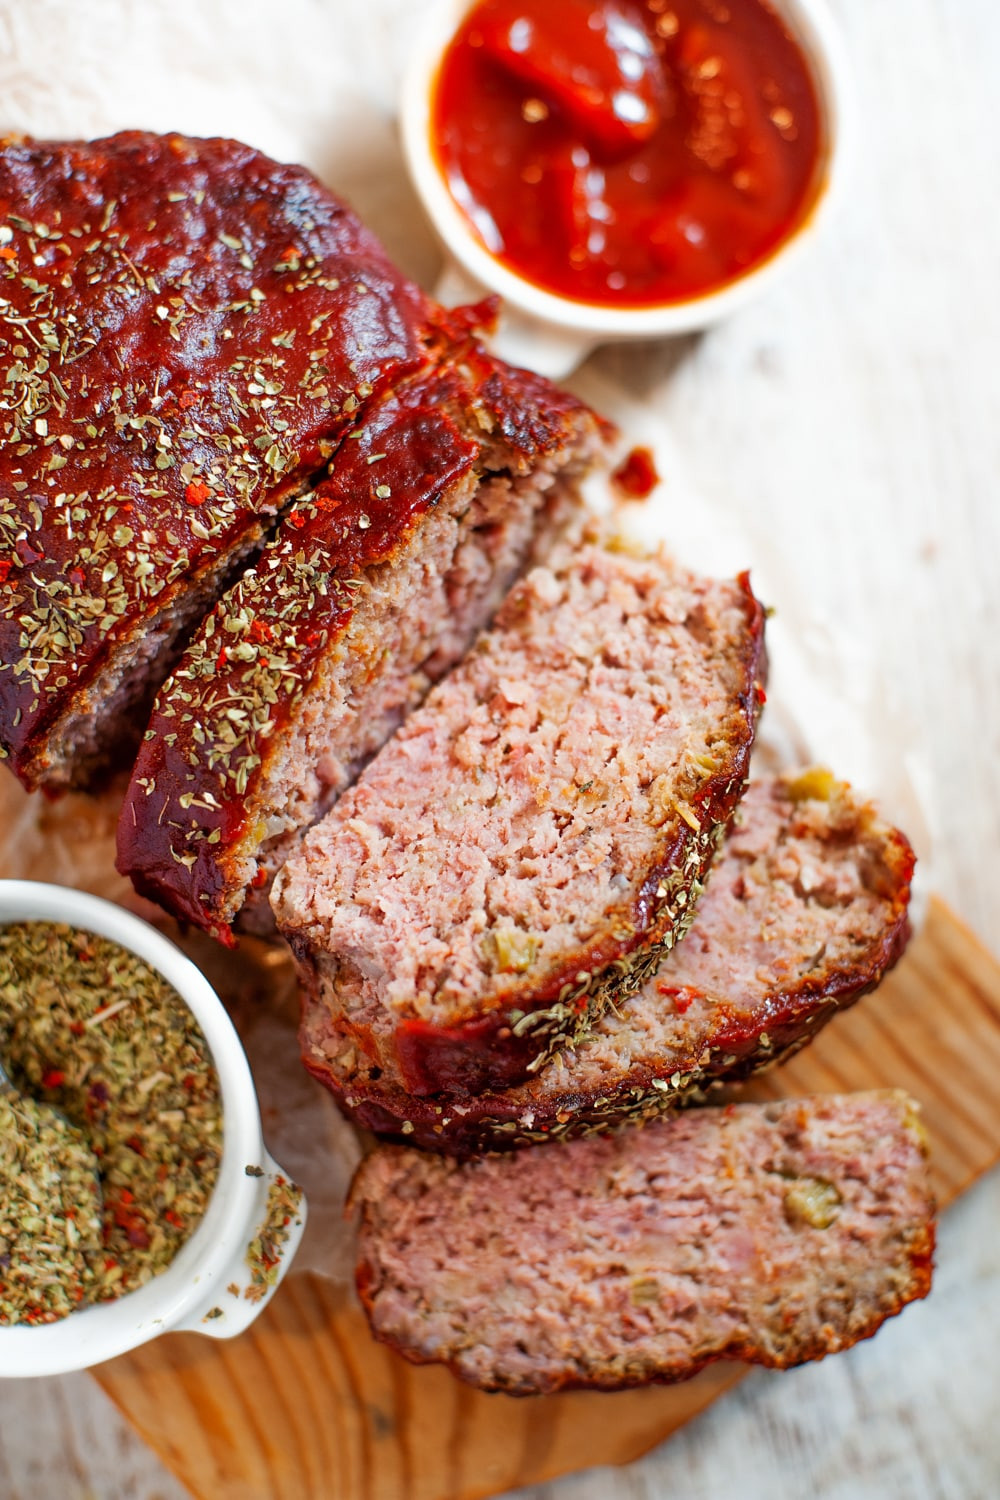 15  Ways How to Make the Best Keto Friendly Meatloaf
 You Ever Tasted